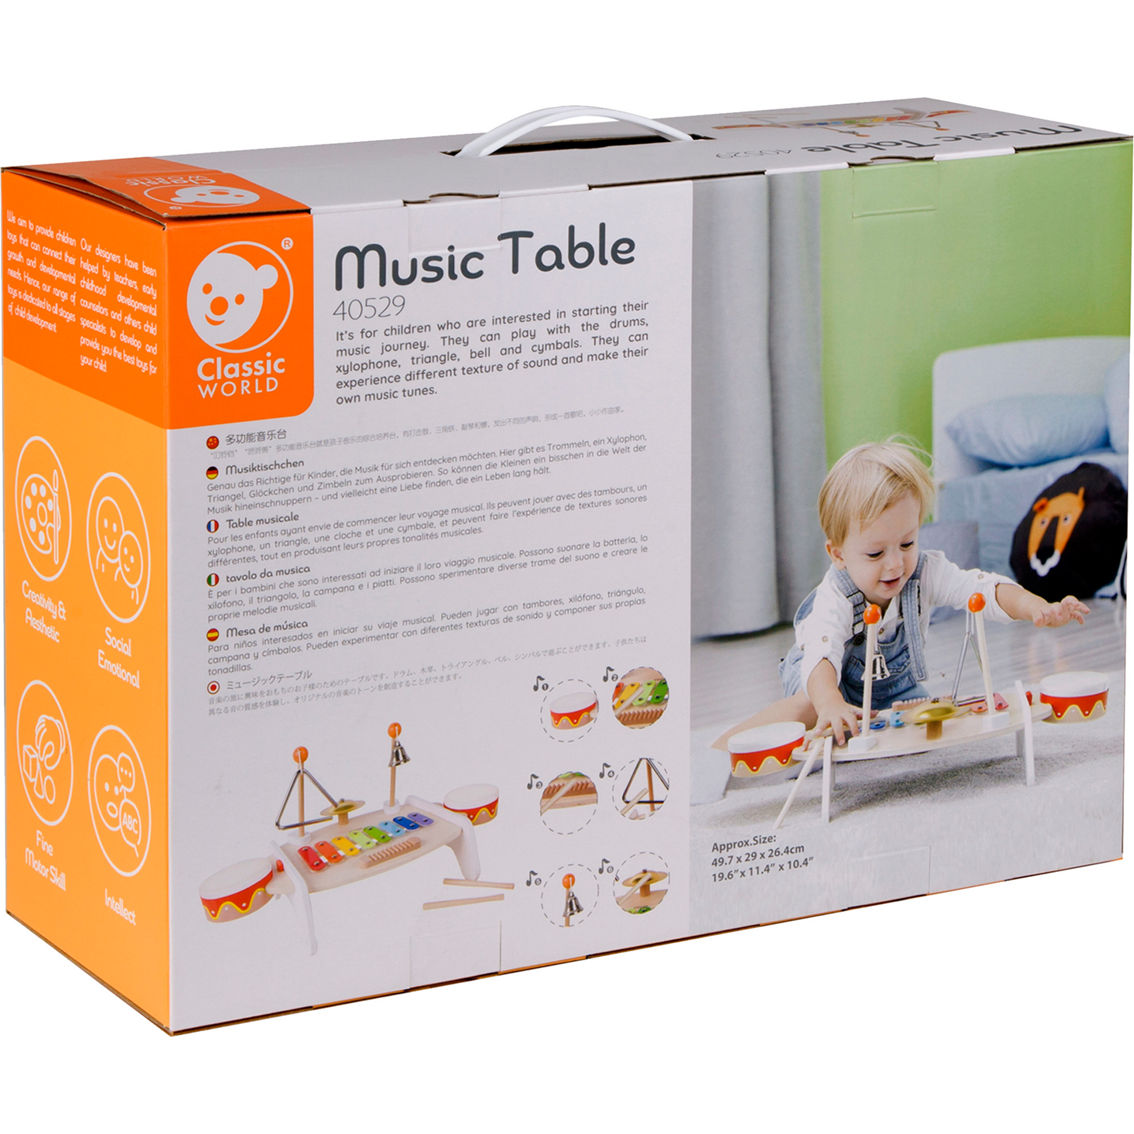 Classic Toy Wood Music Table - Image 2 of 6